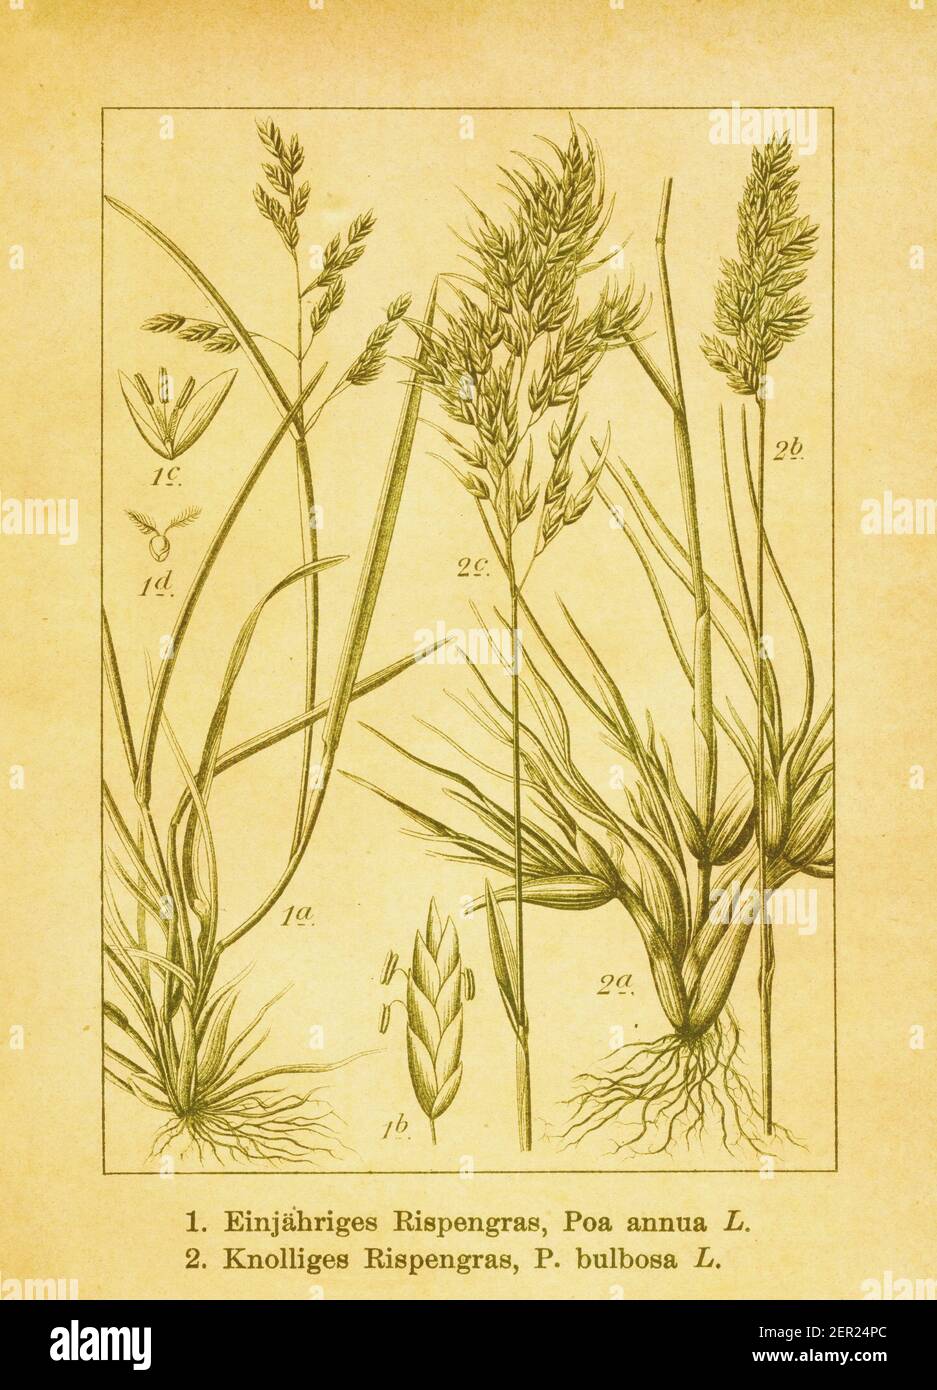 Antique engraving of annual bluegrass and bulbous bluegrass. Illustration by Jacob Sturm (1771-1848) from the book Deutschlands Flora in Abbildungen n Stock Photo